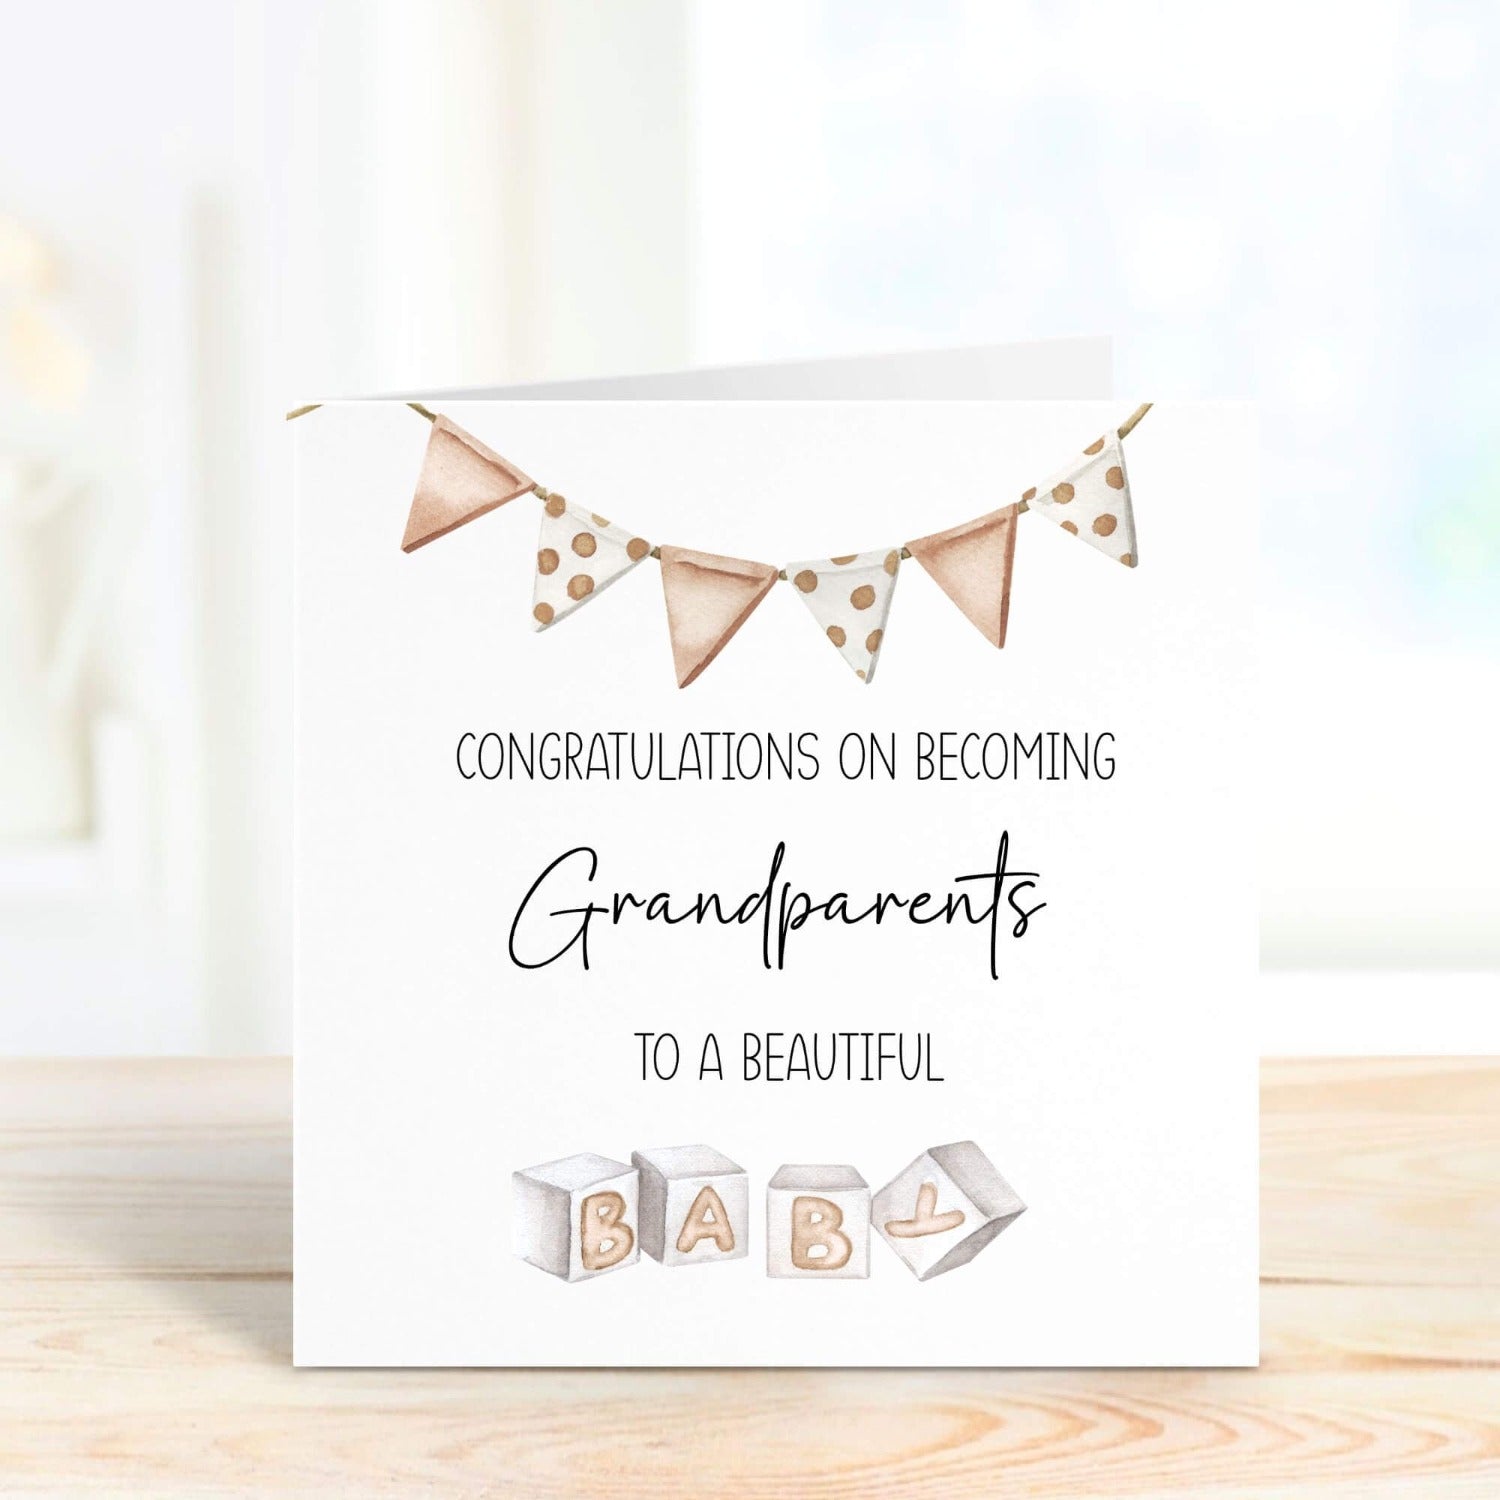 gender neutral congratulations card for grandparents on new baby arrival